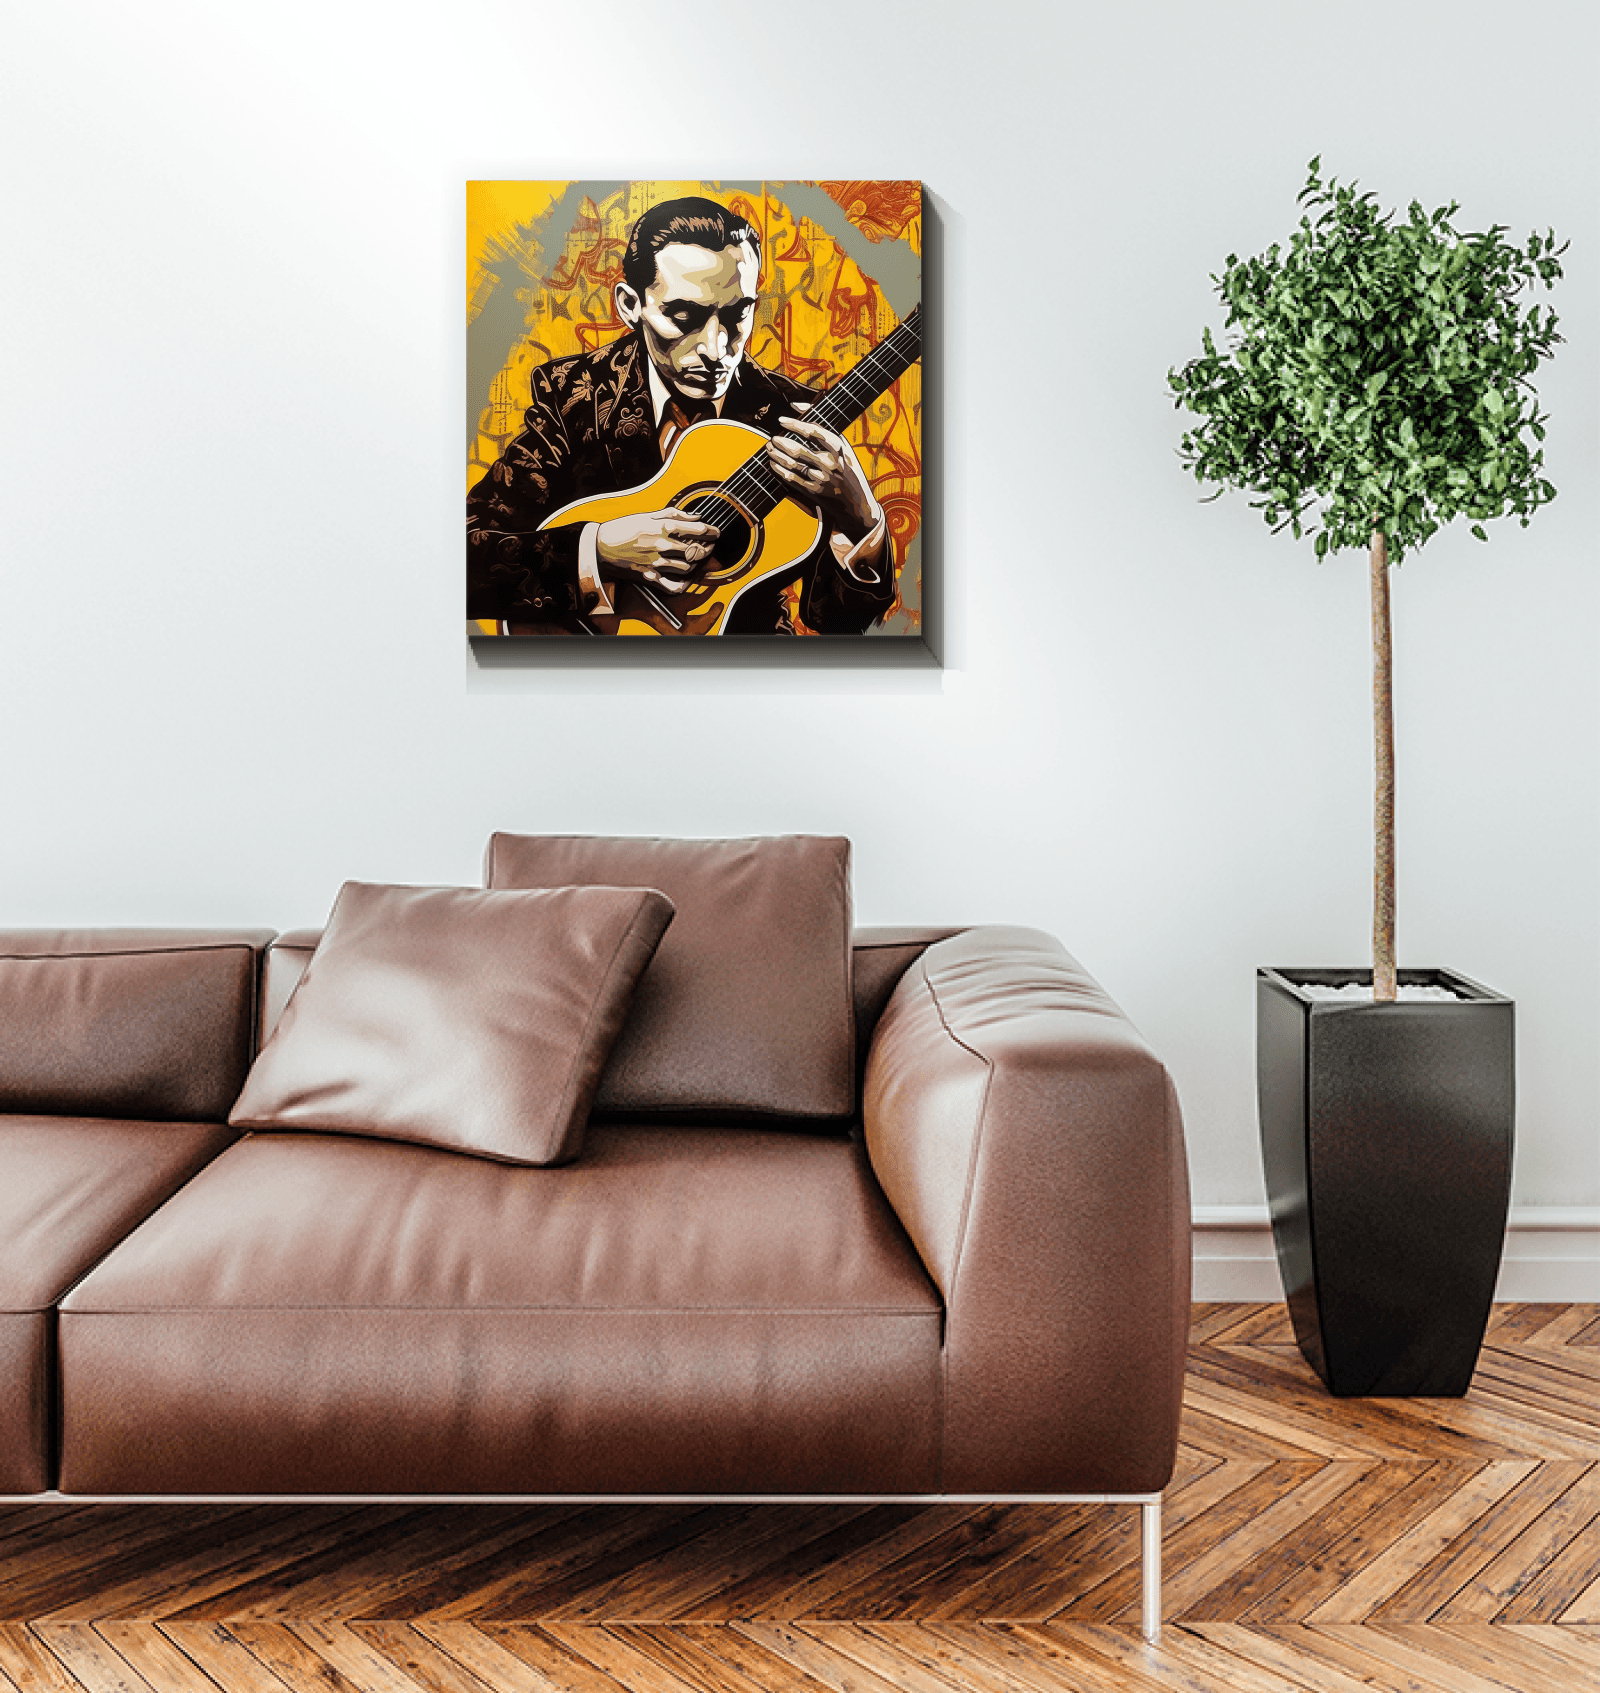 Transformative wrapped canvas art adding soul to interiors.